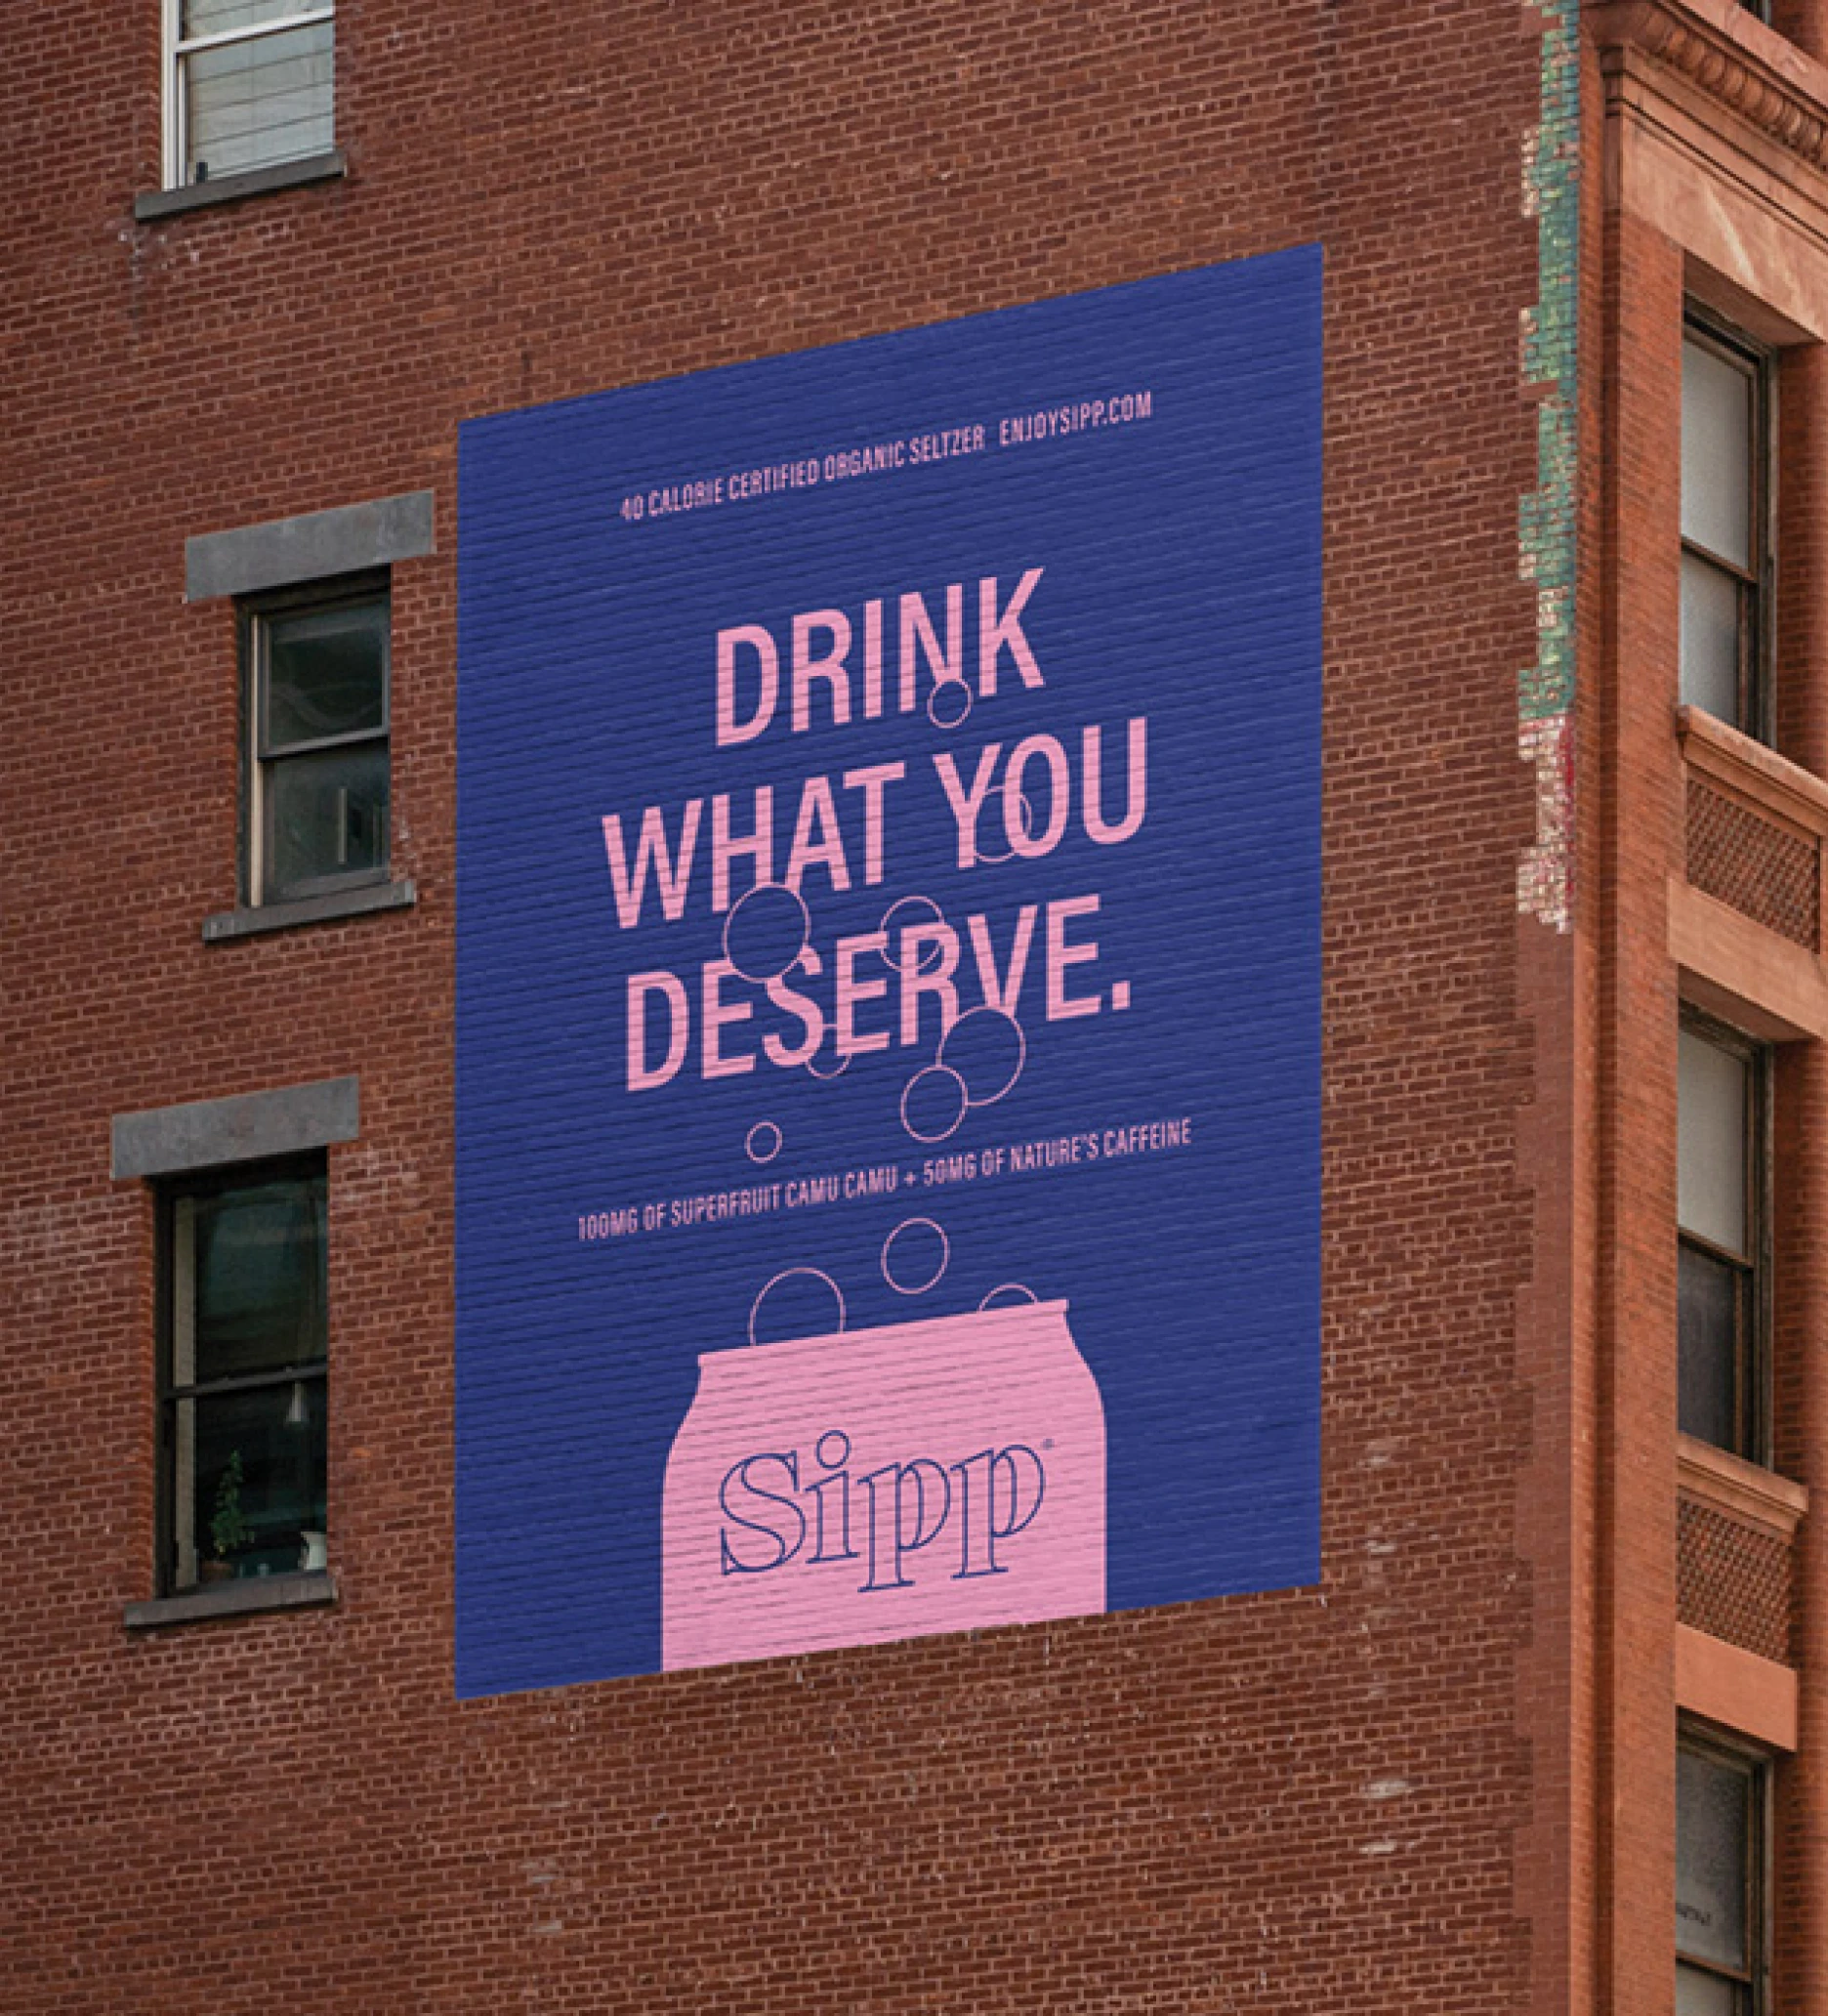 Sipp out-of-home advertising poster design on urban brick wall